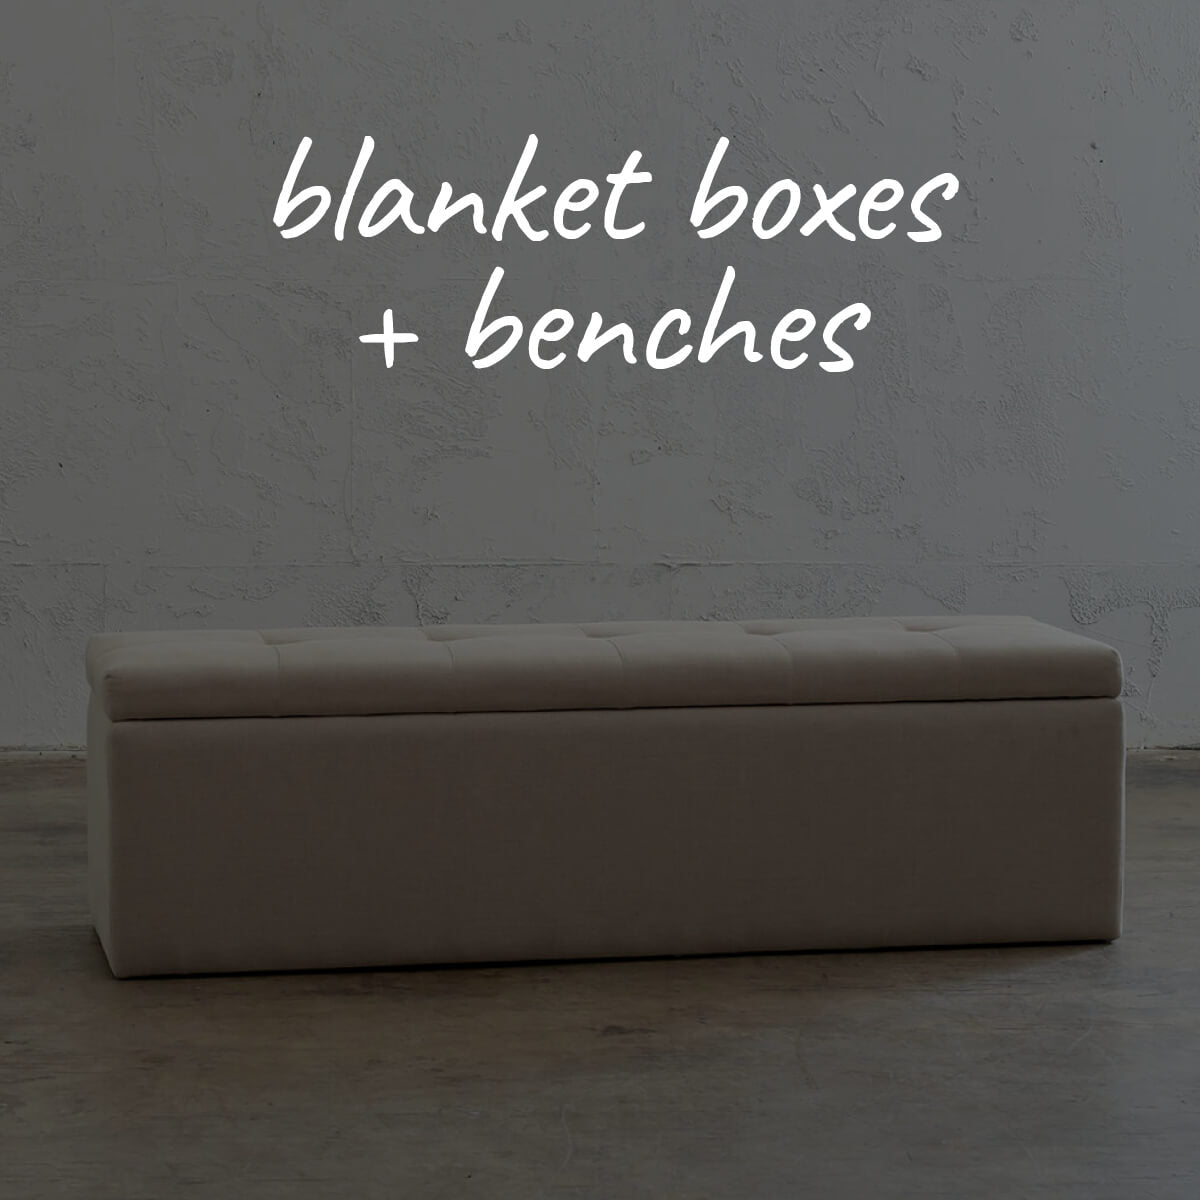 END OF BED  |  BENCHES + BLANKET BOXES